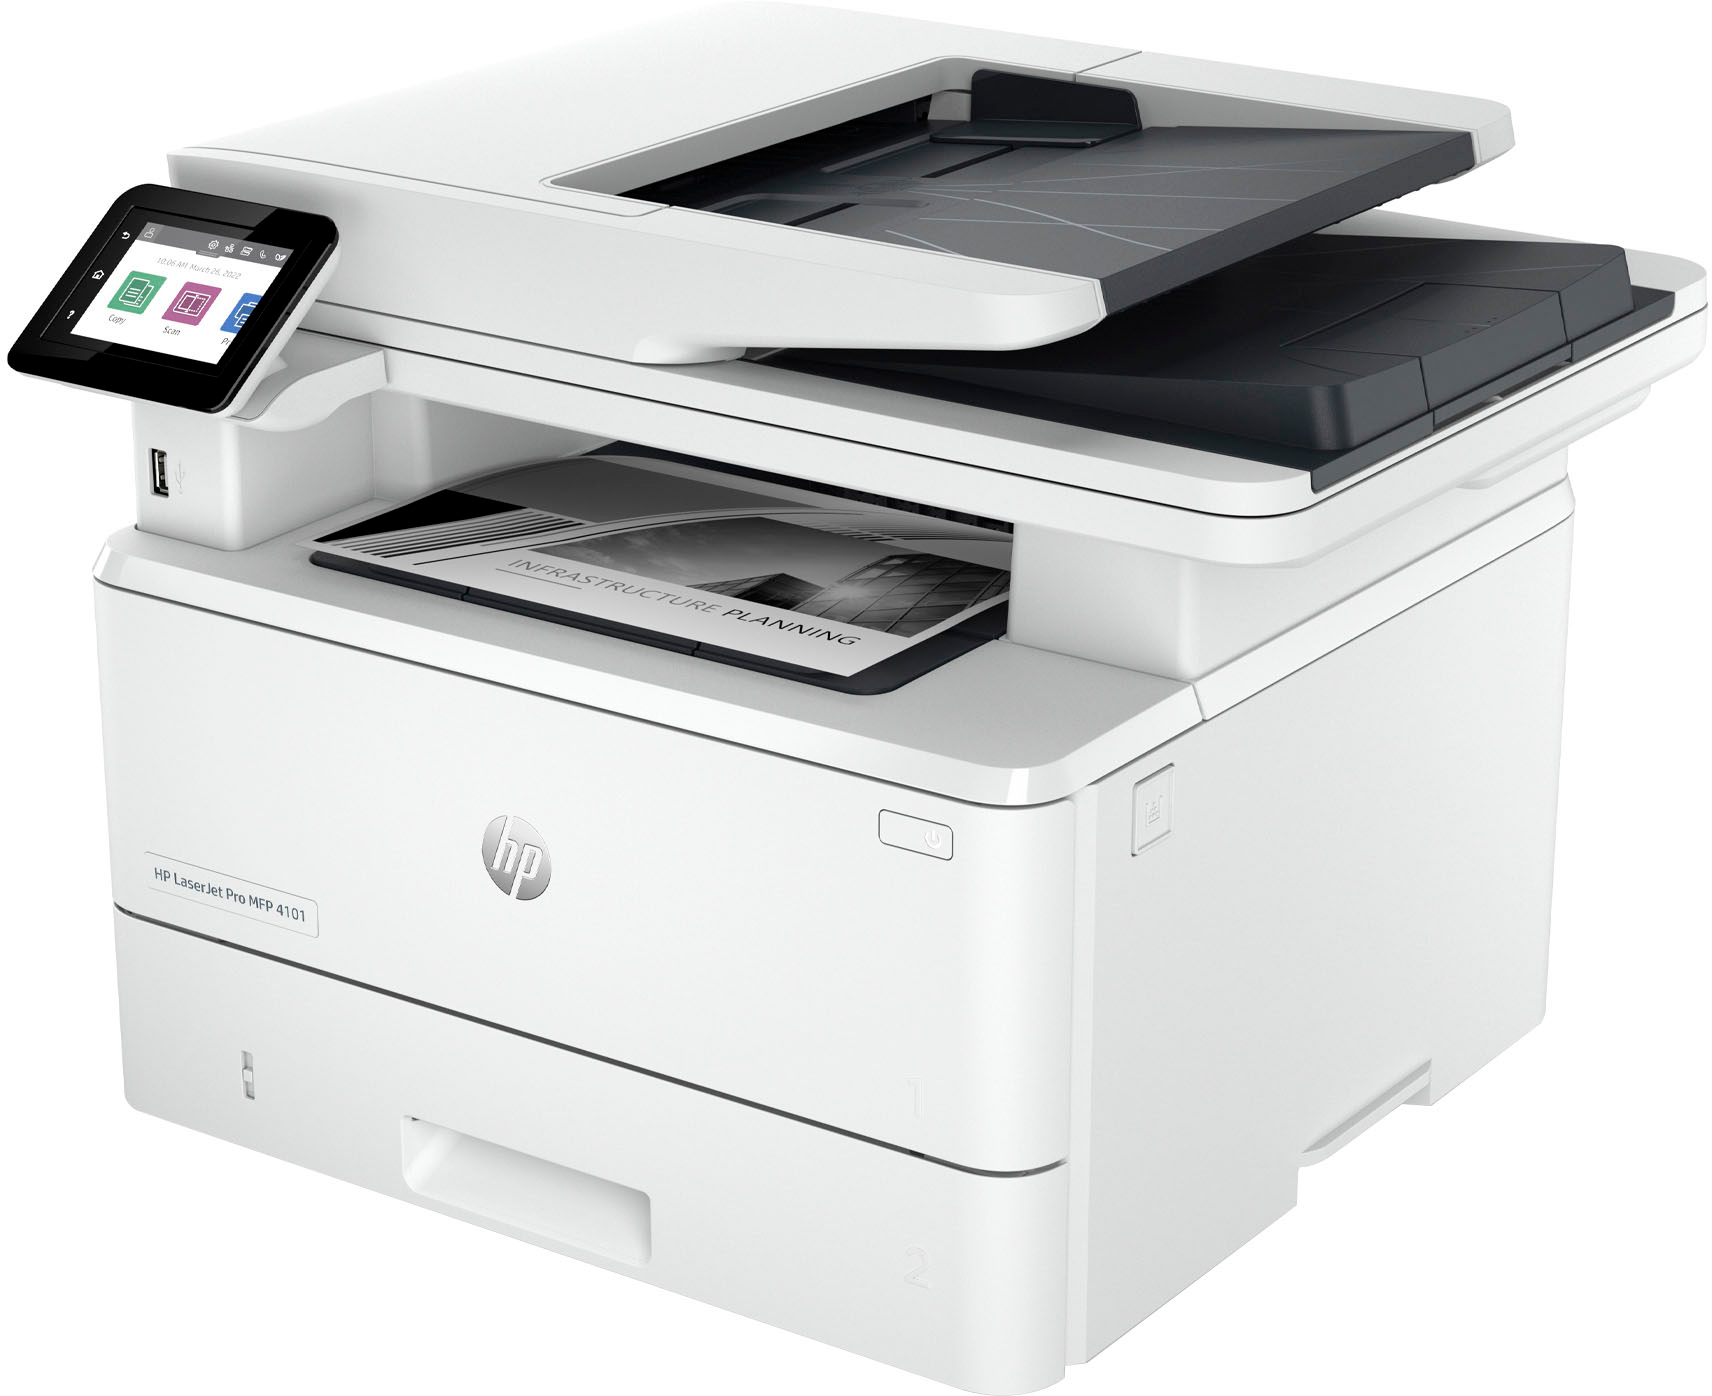 HP LaserJet Pro MFP 4101fdne All-In-One Black-and-White Laser Printer with 3 months of Instant Ink included with HP+ White LaserJet Pro MFP - Best Buy